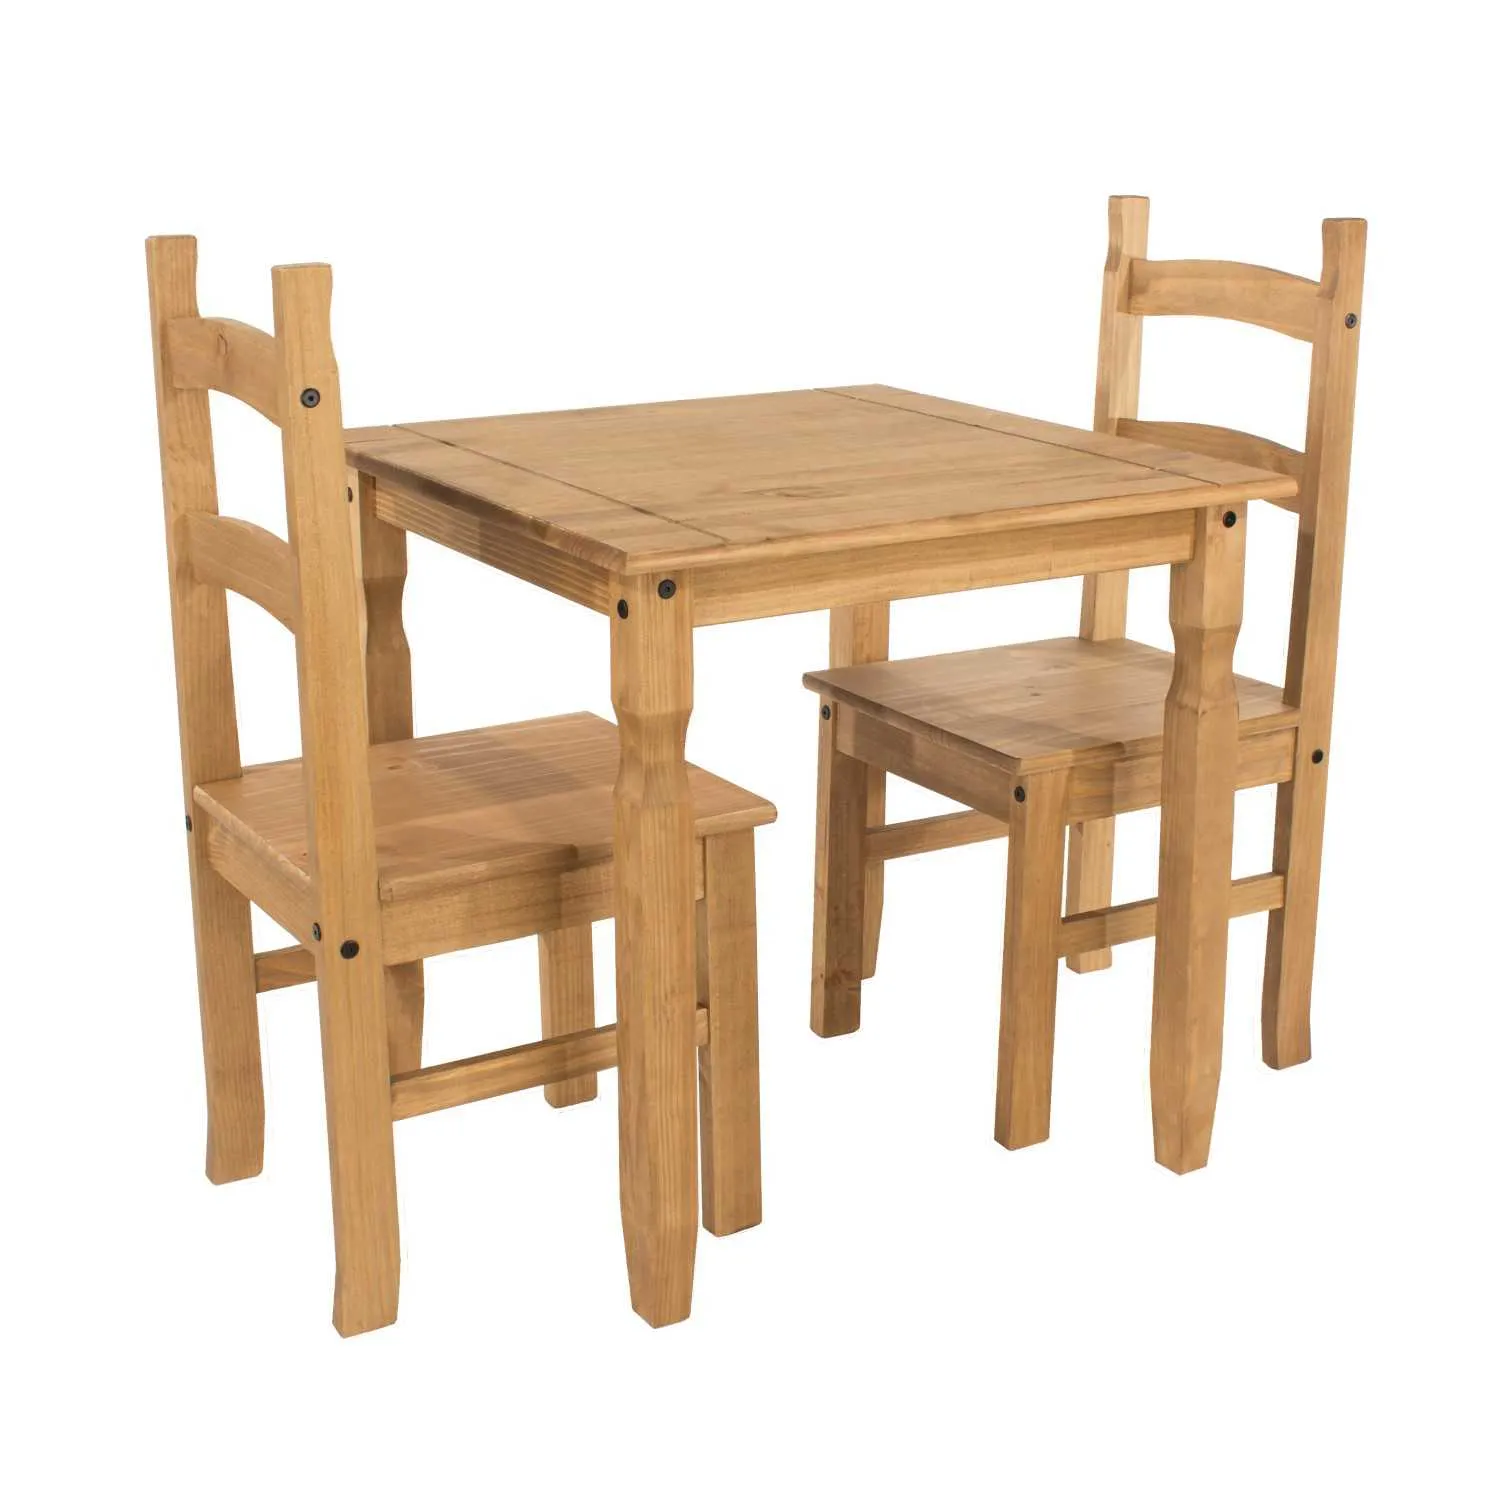 Small 75cm Square Waxed Pine Wooden Kitchen Dining Table and 2 Chair Set